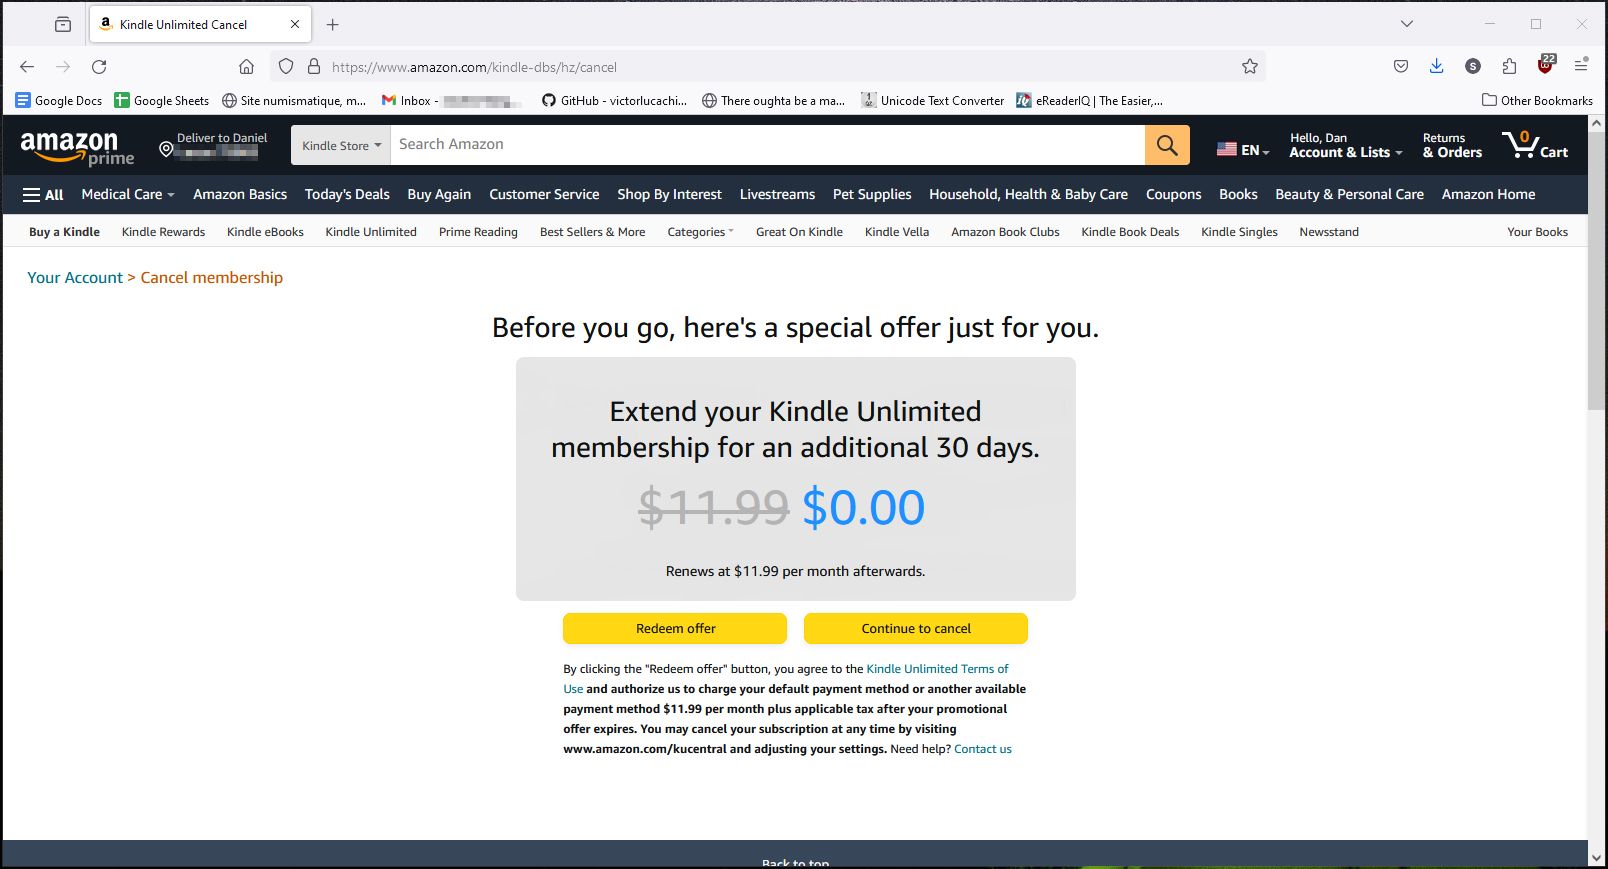 Kindle Free Trial: Get 1 Month of Kindle Unlimited for Free or 2